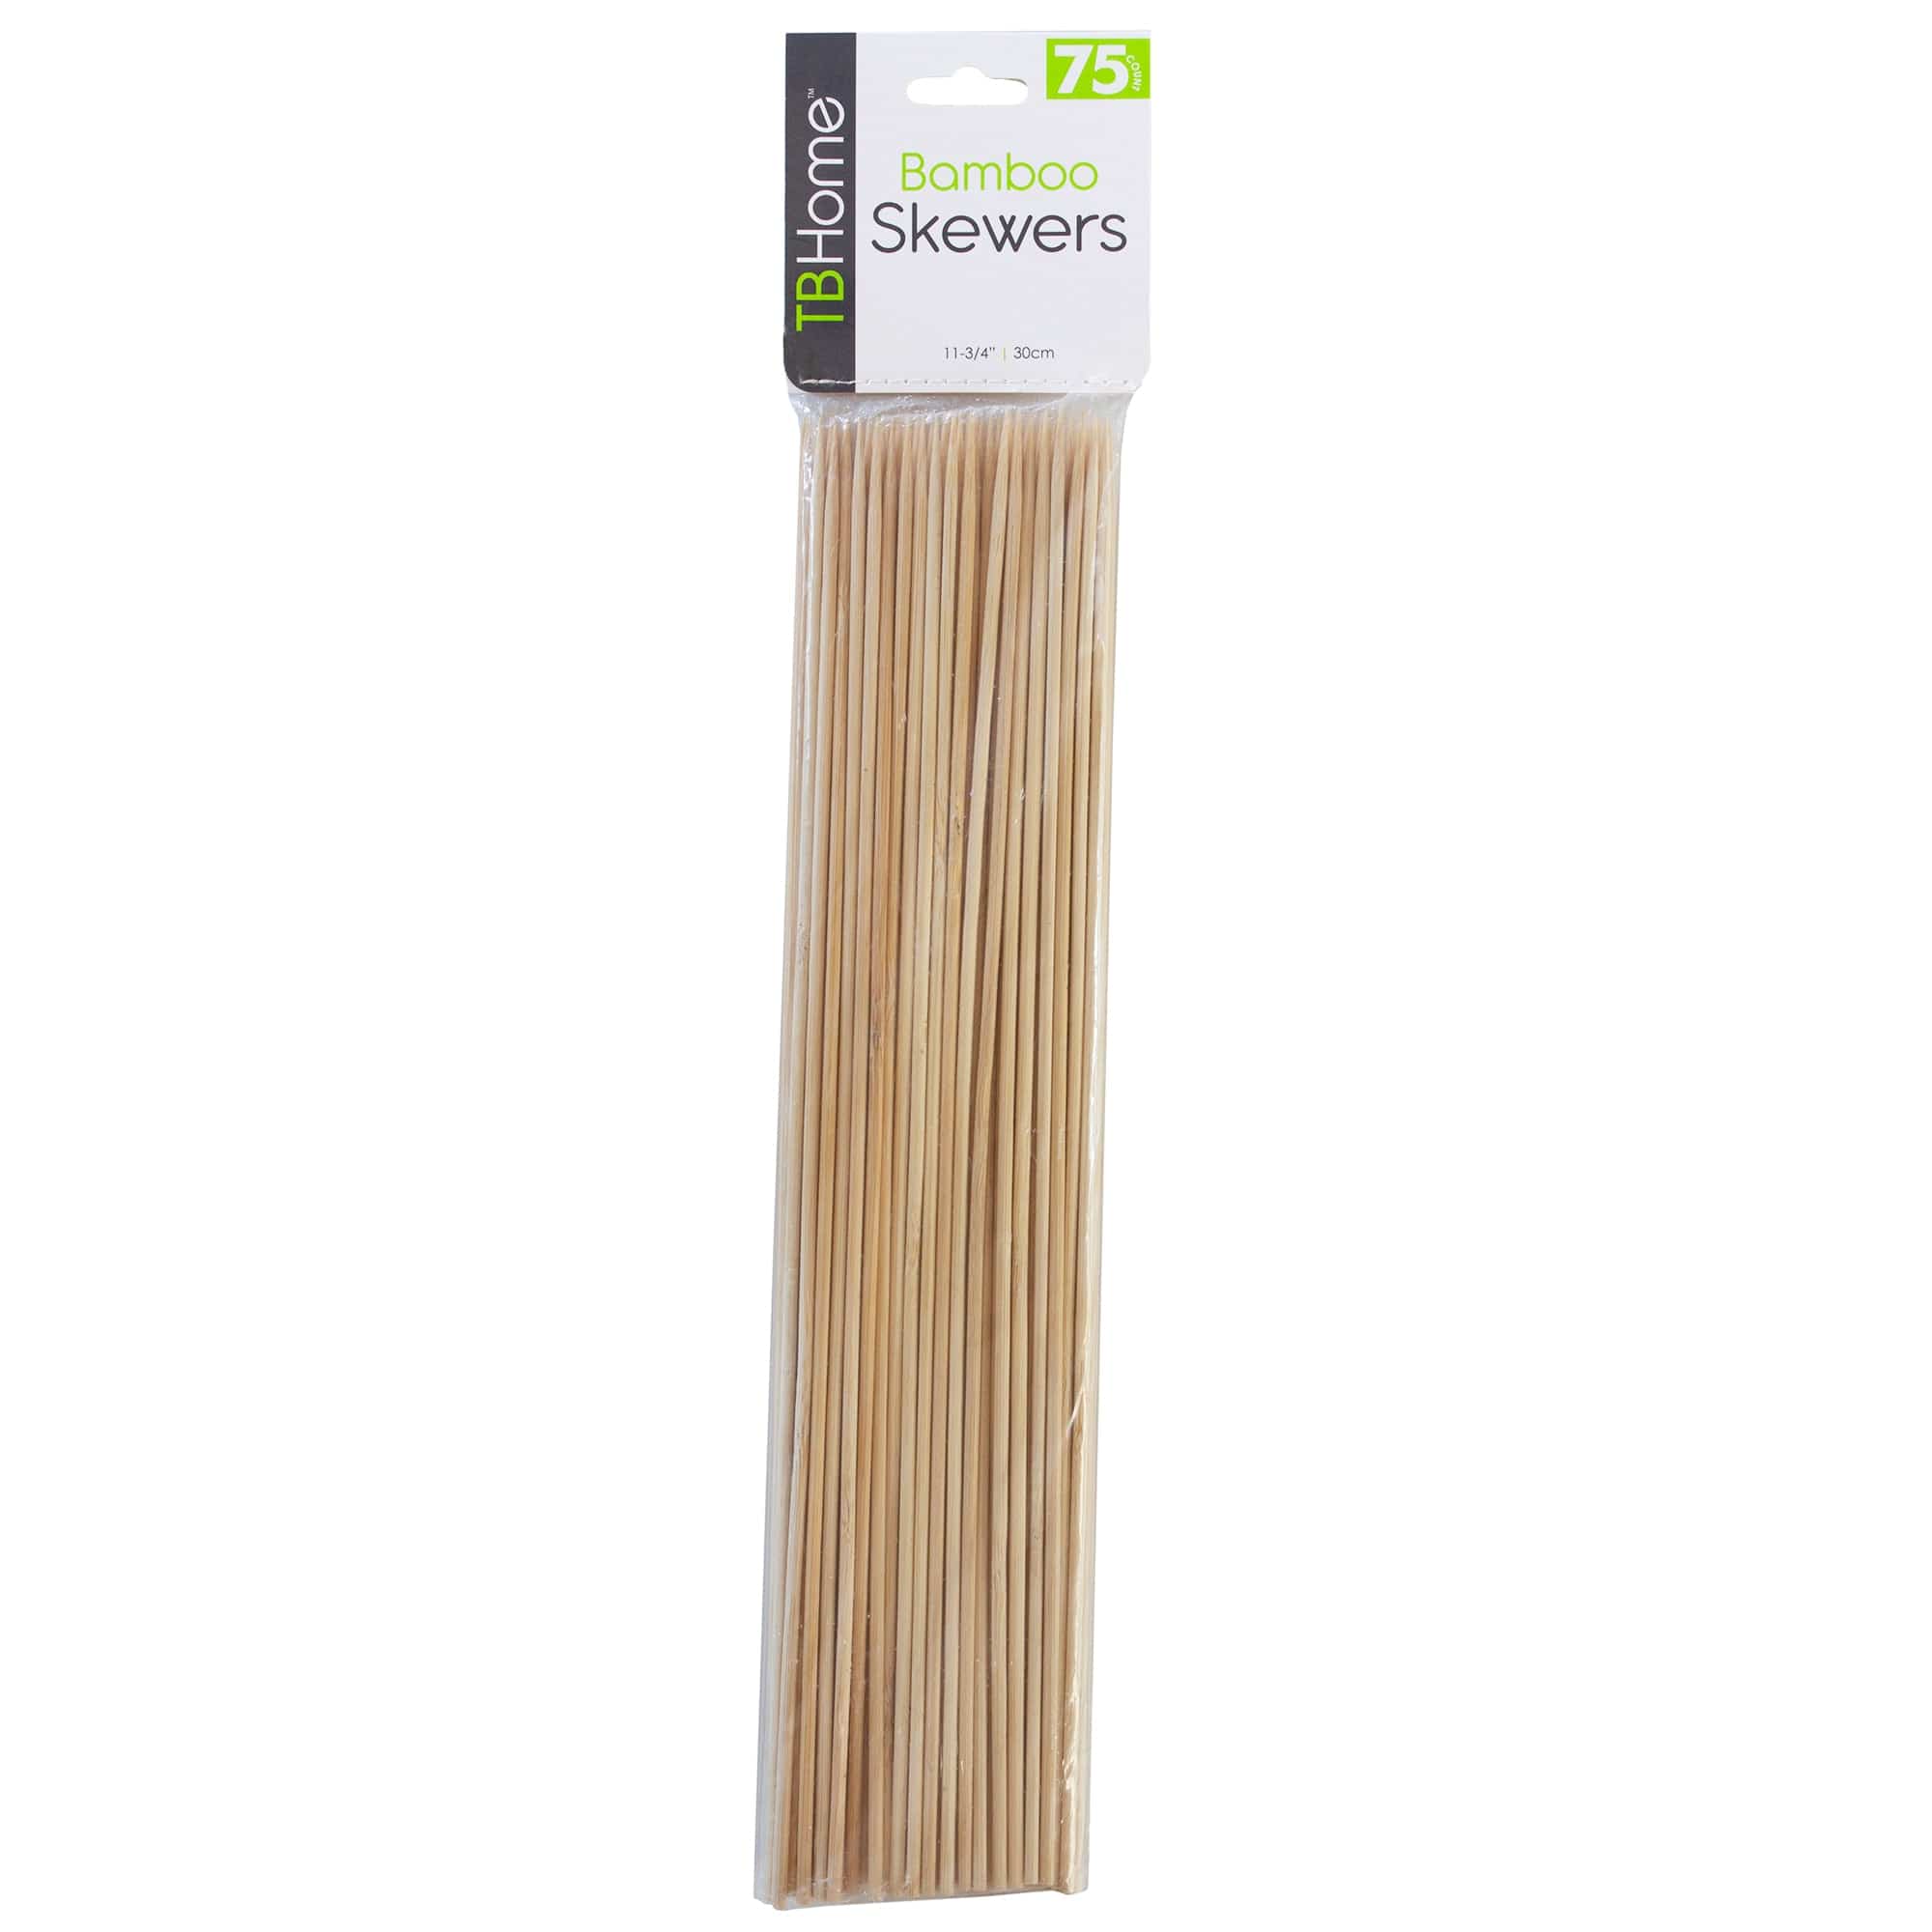 Totally Bamboo TB Home™ Bamboo Skewer Set, 75 Pack